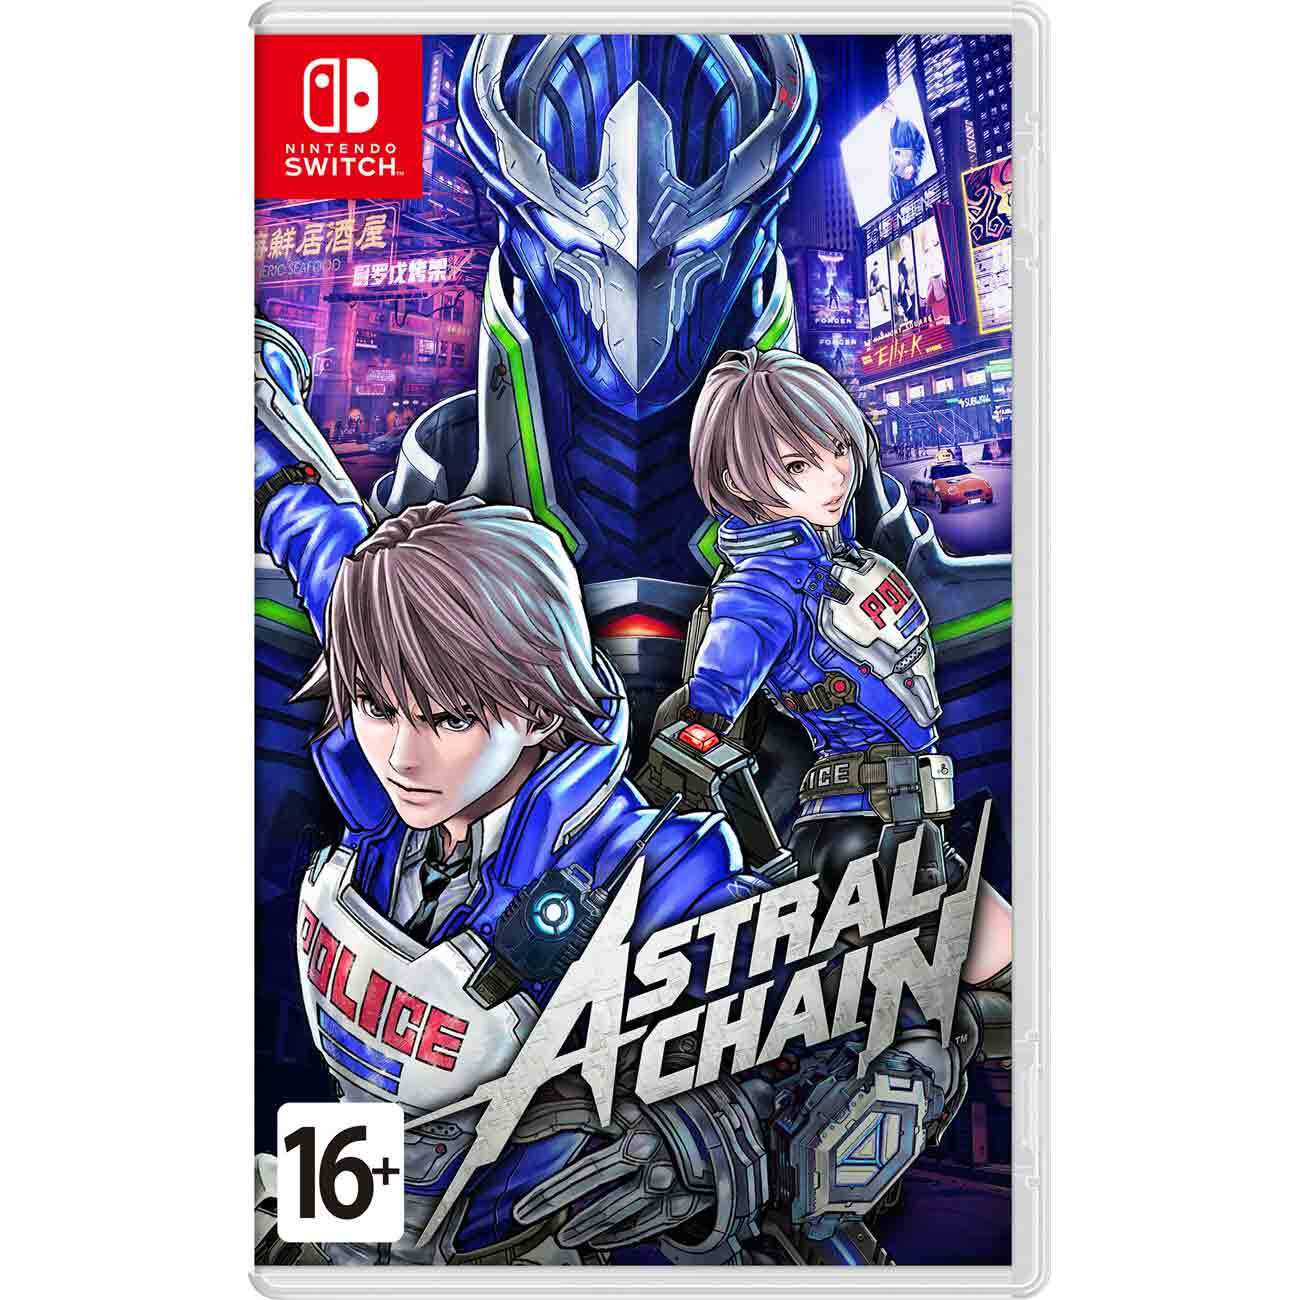 Astral chain nintendo. Astral Chain Нинтендо свитч. Astral Chain Nintendo Switch обложка. Игра Nintendo Astral Chain. Astral Chain Nintendo Switch купить.